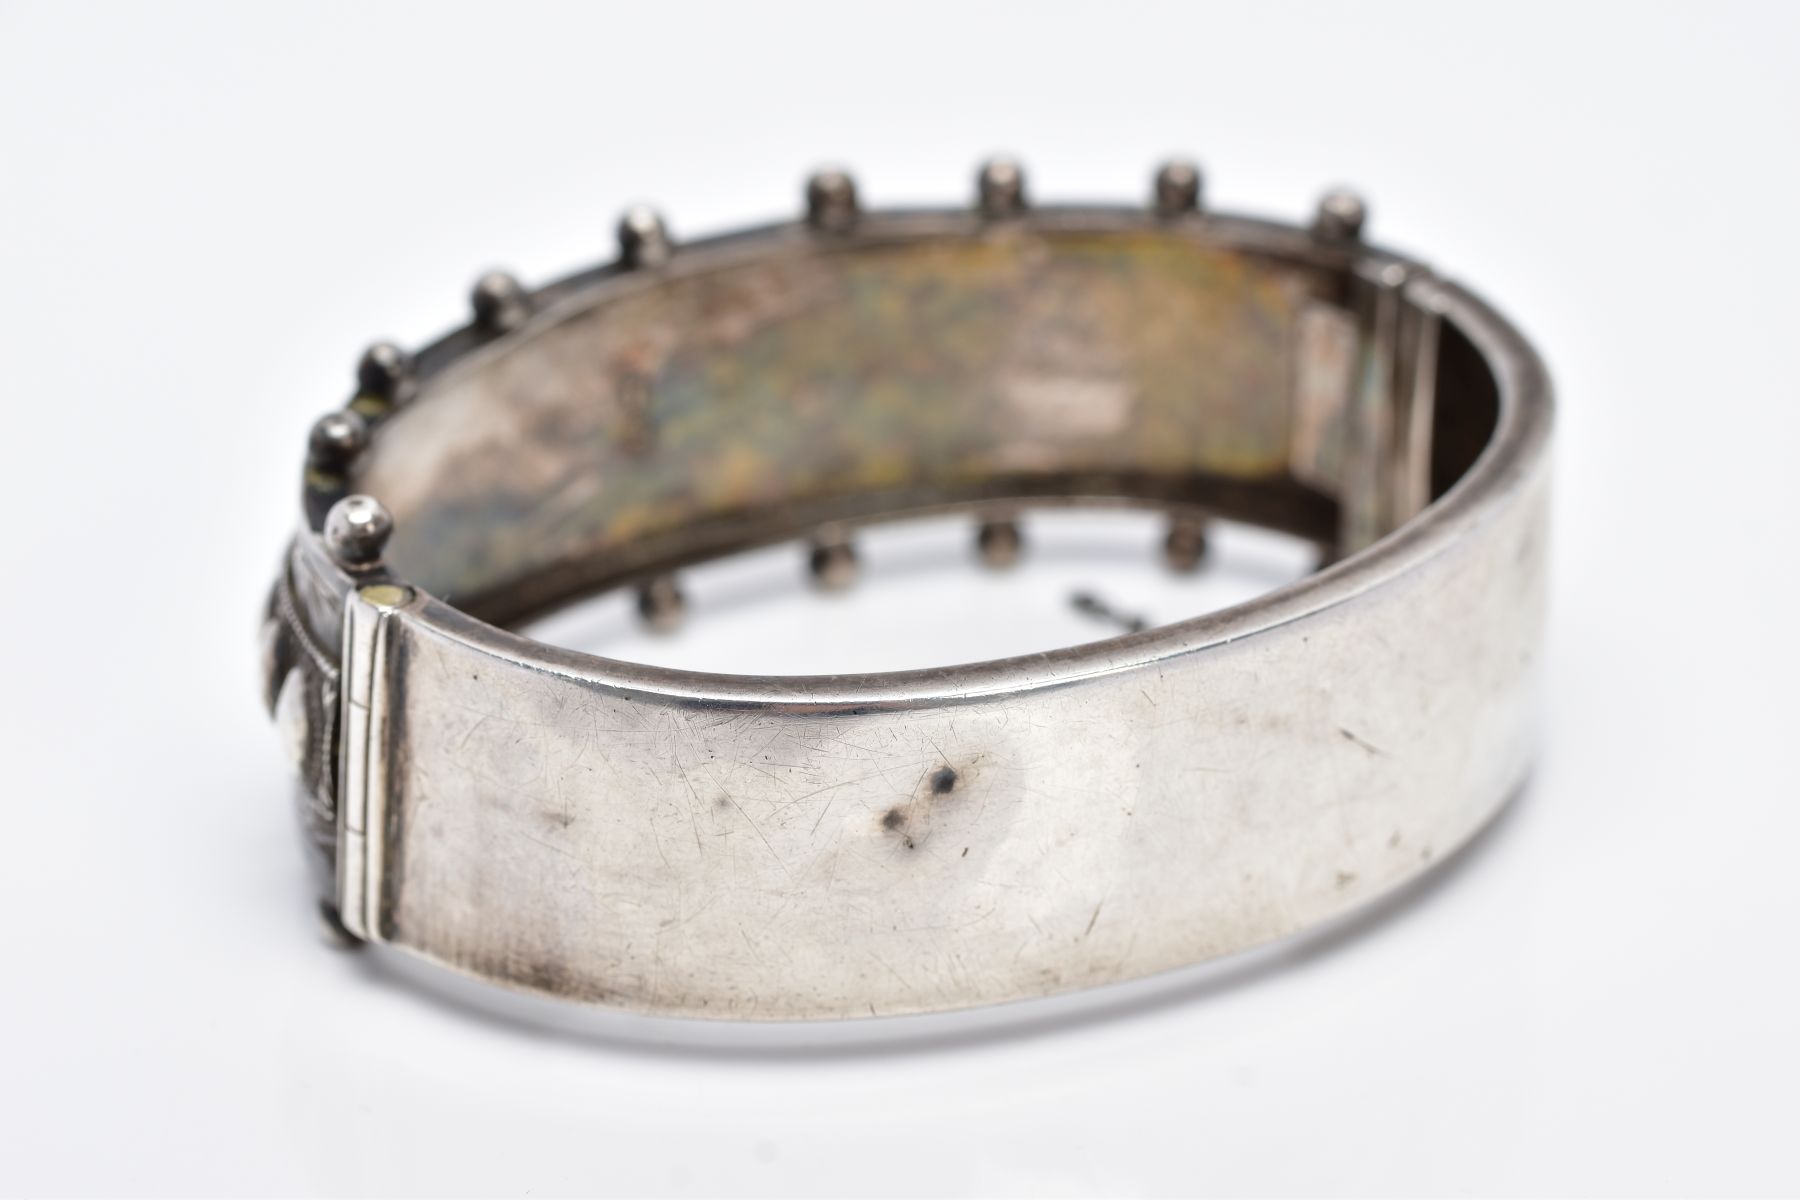 A VICTORIAN SILVER BANGLE, applied bead word decoration and half engraved, measuring 20.0mm in - Image 4 of 5